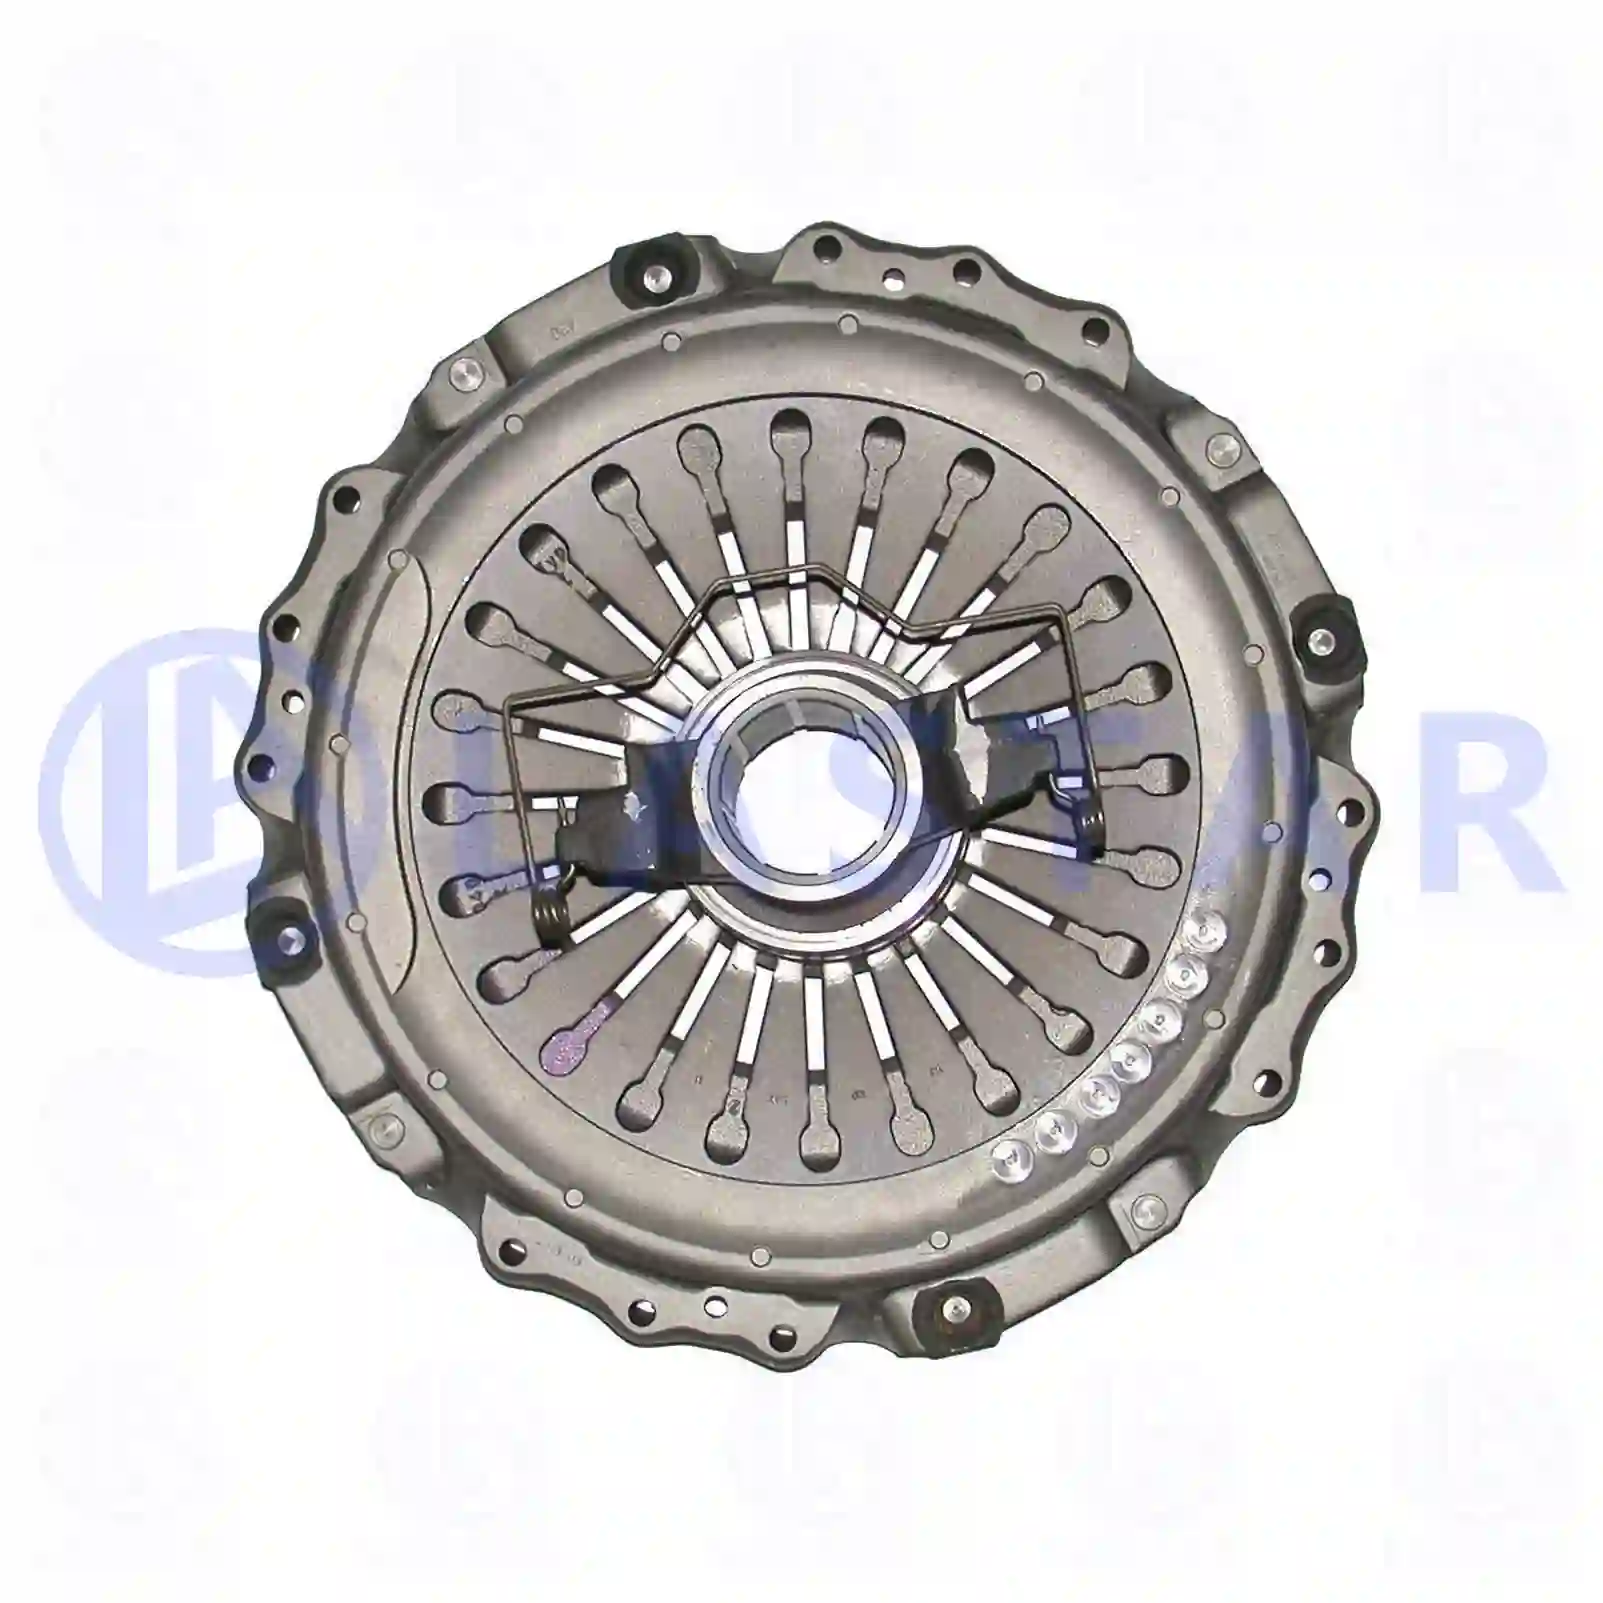 Clutch cover, with release bearing, 77722264, 1521712, 20569128, 3192201, 8113512, 8116512, 8119512, 85000521 ||  77722264 Lastar Spare Part | Truck Spare Parts, Auotomotive Spare Parts Clutch cover, with release bearing, 77722264, 1521712, 20569128, 3192201, 8113512, 8116512, 8119512, 85000521 ||  77722264 Lastar Spare Part | Truck Spare Parts, Auotomotive Spare Parts